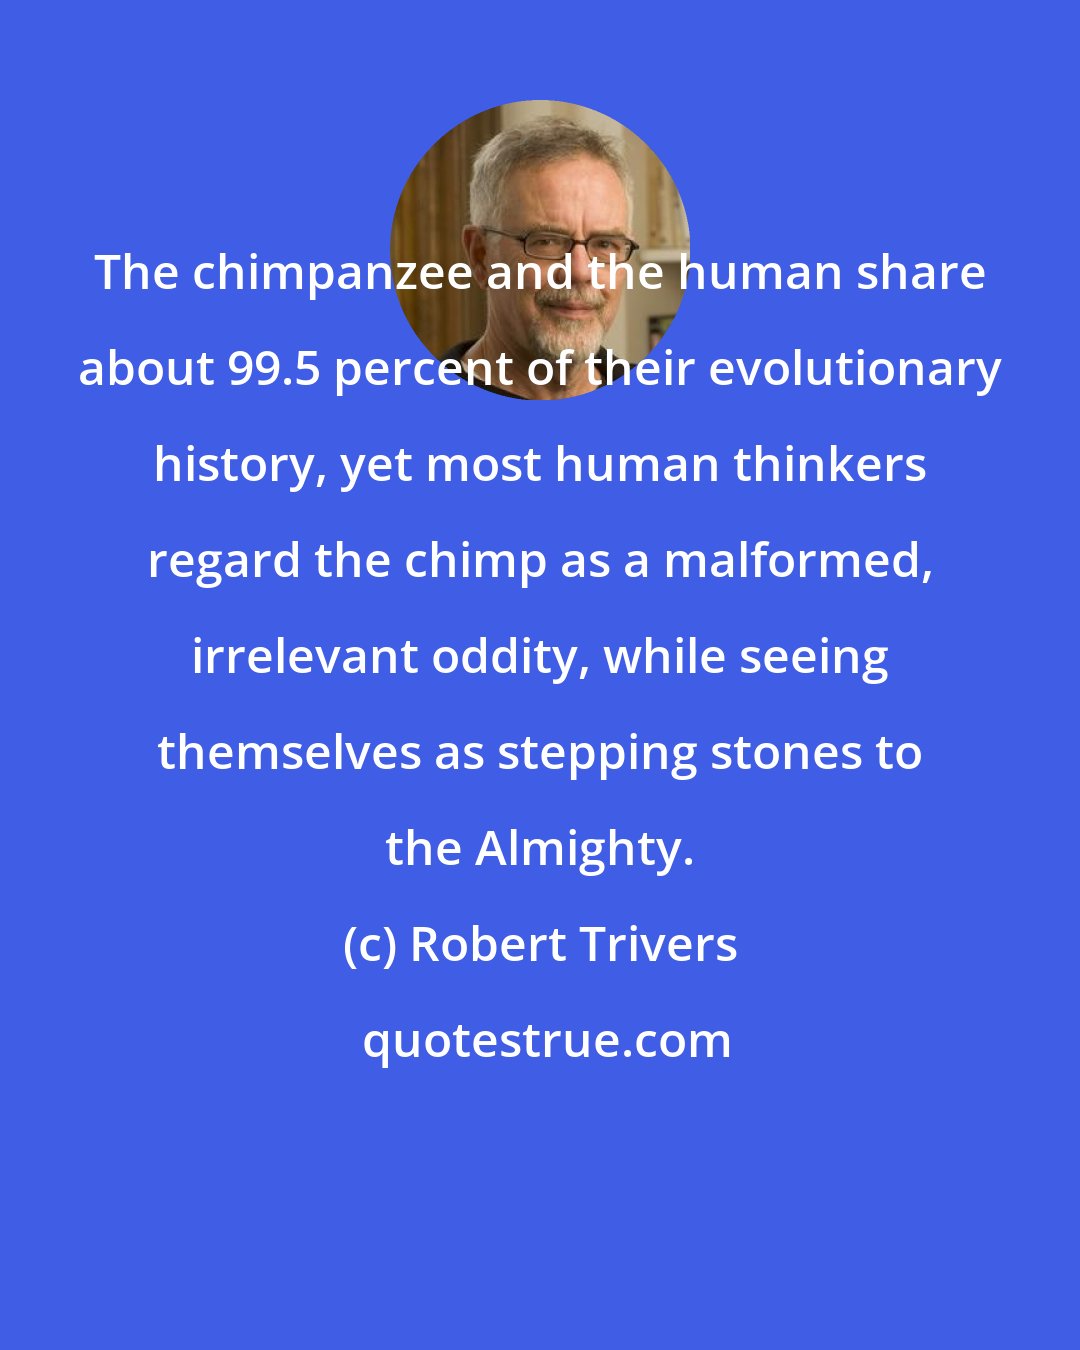 Robert Trivers: The chimpanzee and the human share about 99.5 percent of their evolutionary history, yet most human thinkers regard the chimp as a malformed, irrelevant oddity, while seeing themselves as stepping stones to the Almighty.